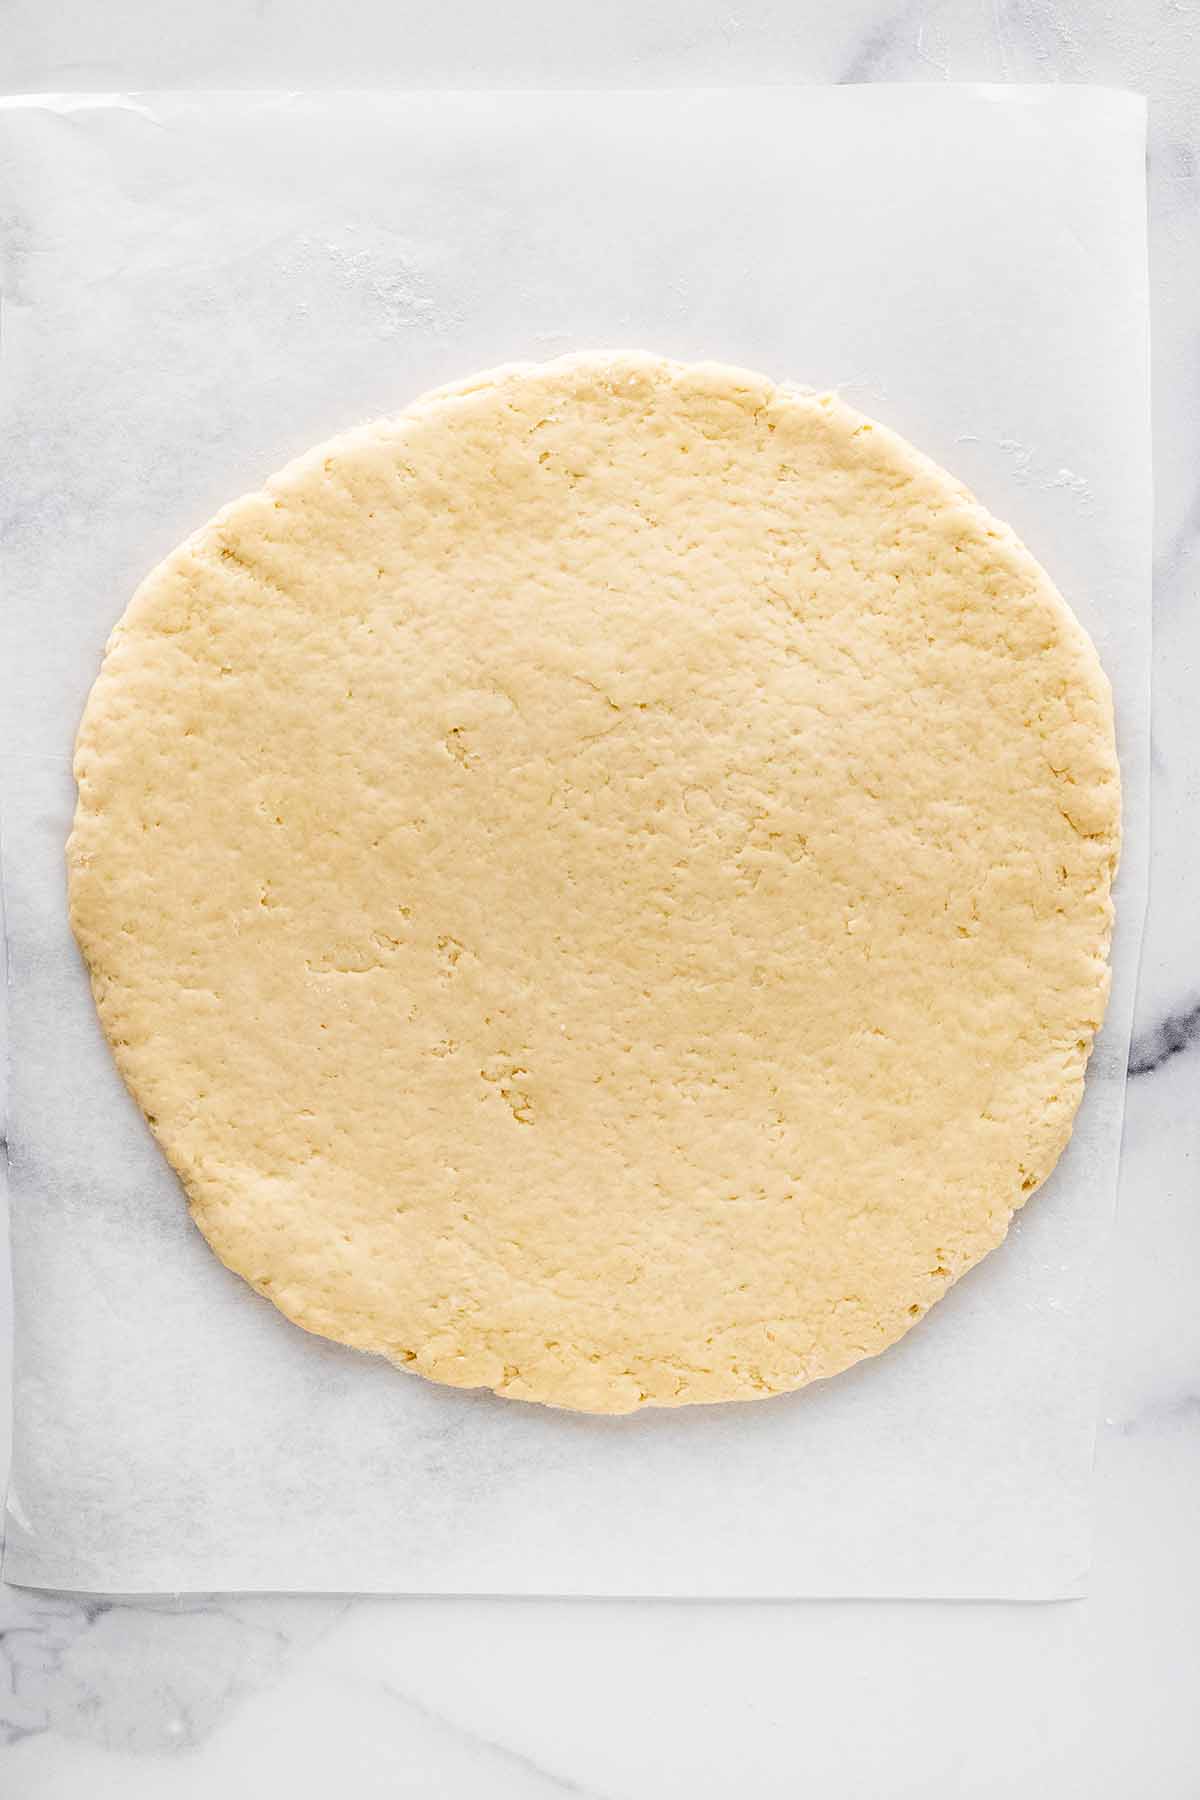 Overhead view of rolled out scone dough on a piece of wax paper on a marble surface.